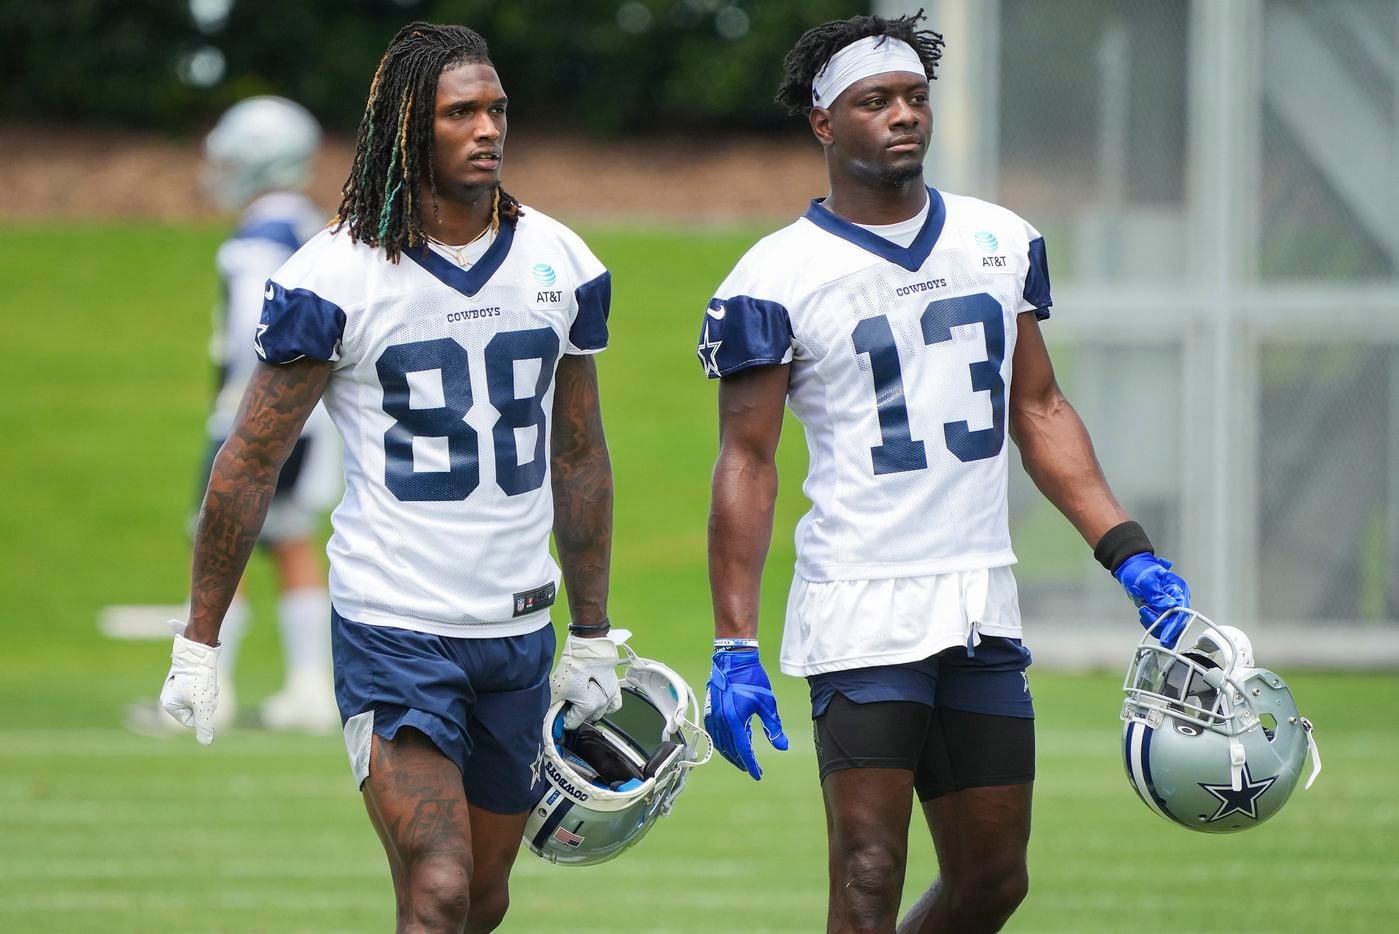 Dallas Cowboys wide receivers CeeDee Lamb (88) and Michael Gallup (13) walk between drills during a minicamp practice at The Star on Tuesday, June 8, 2021, in Frisco. (Smiley N. Pool/The Dallas Morning News)